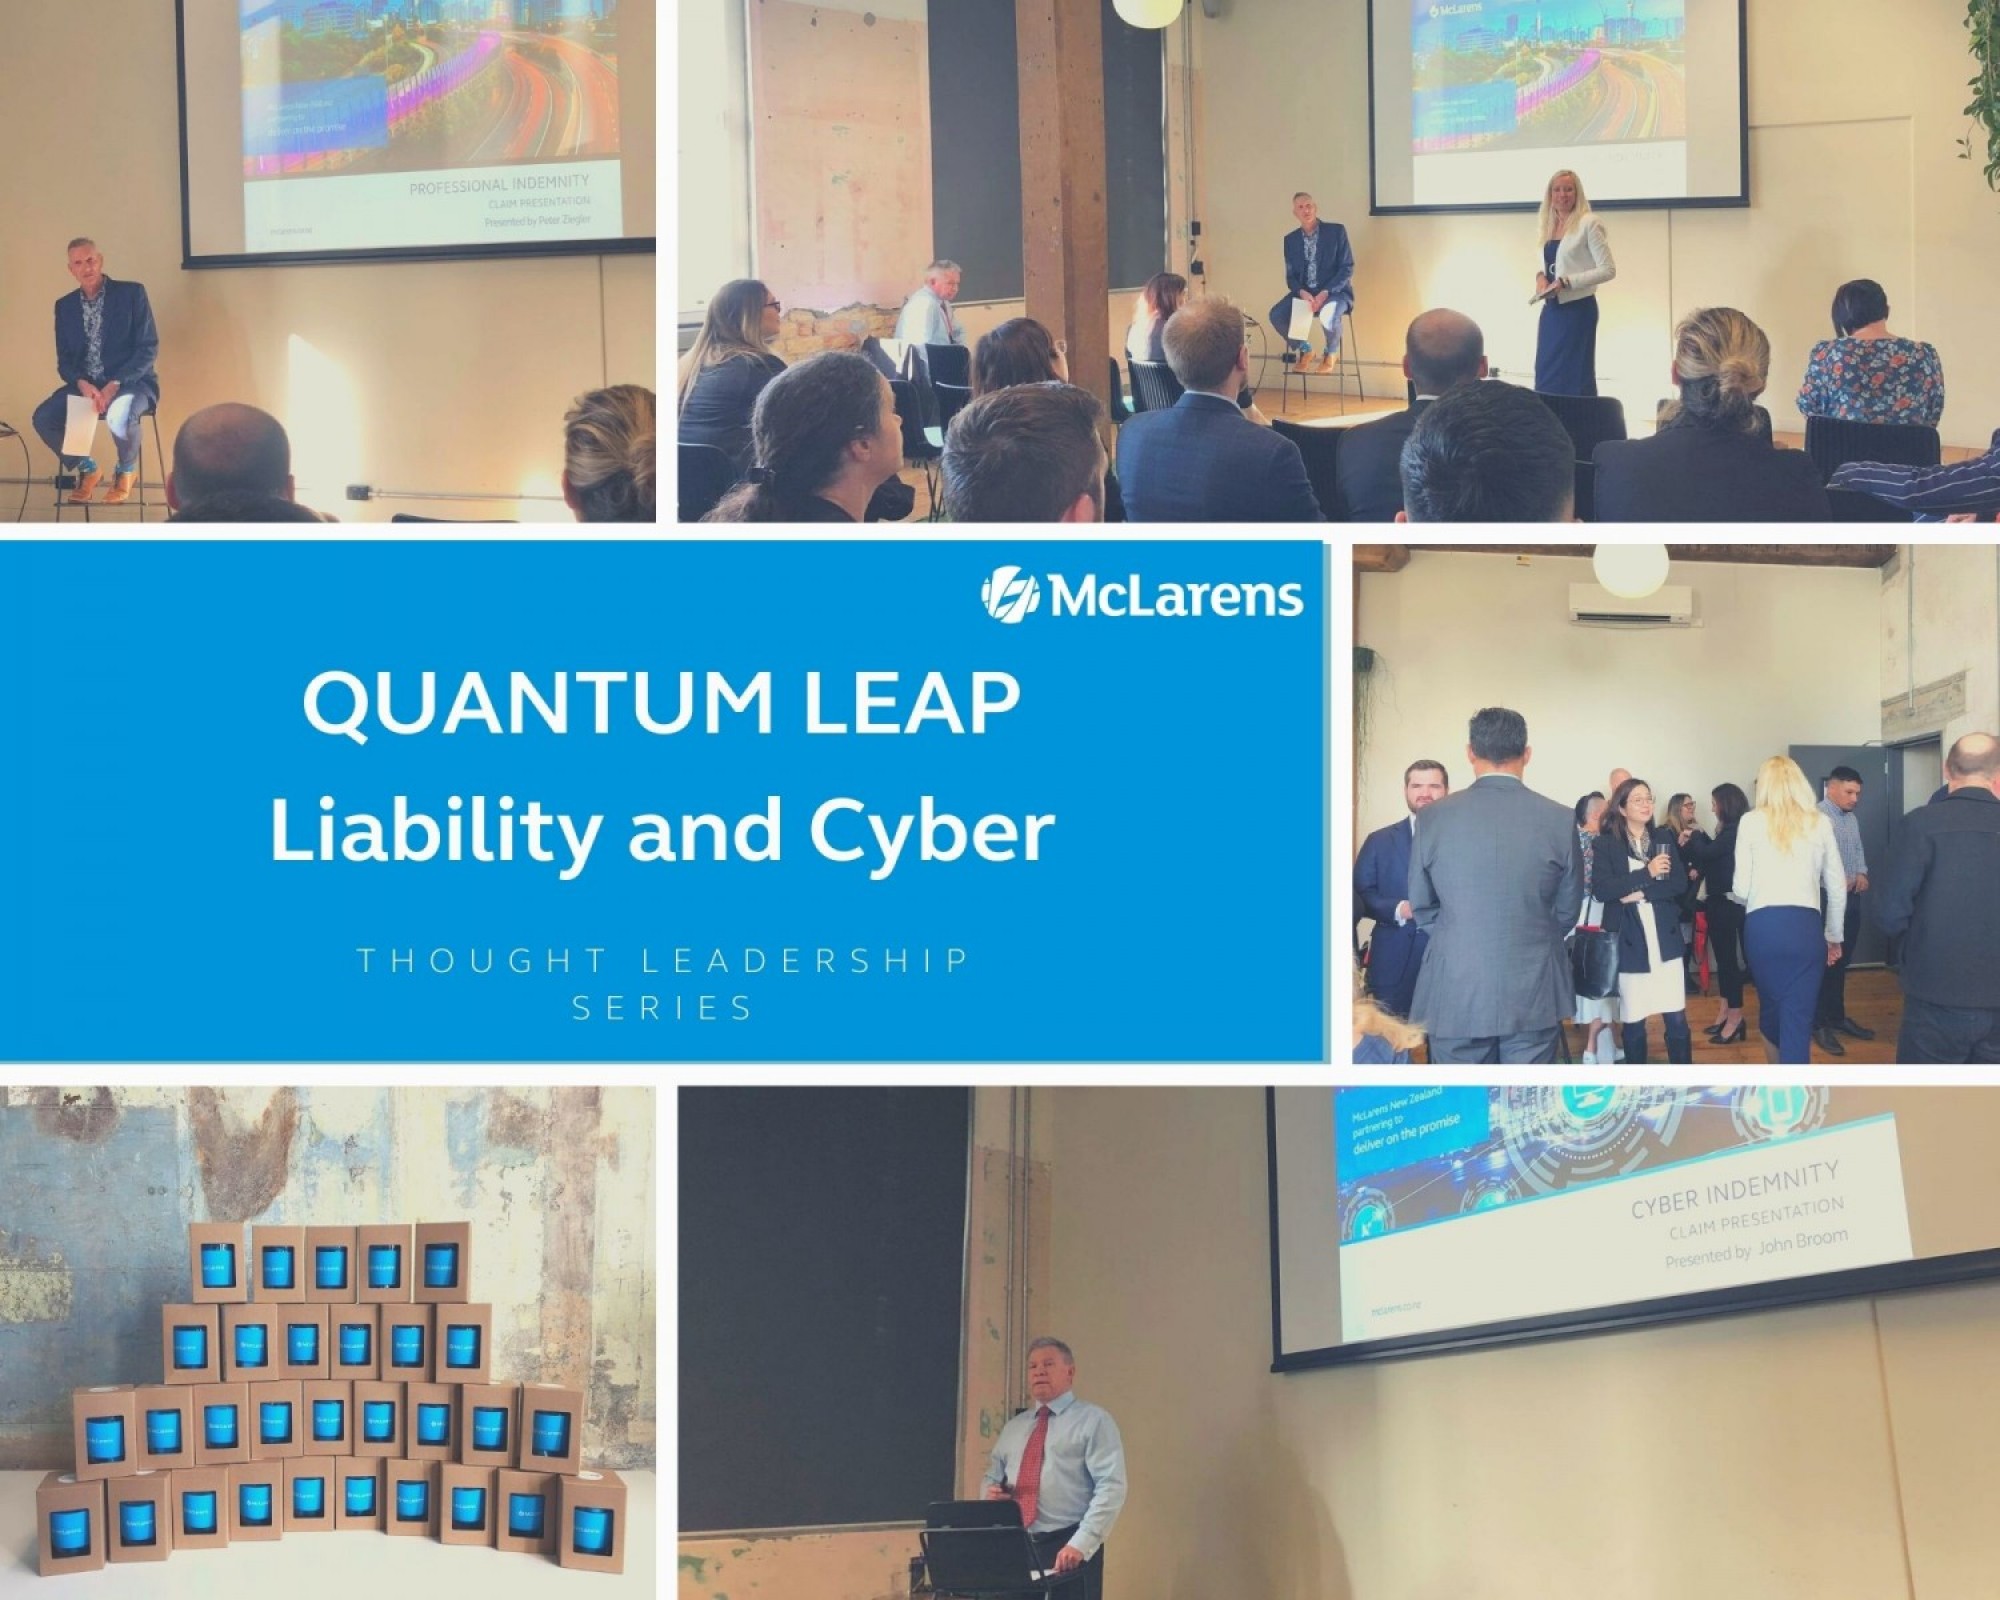 McLarens Thought Leadership - Liability and Cyber Seminar